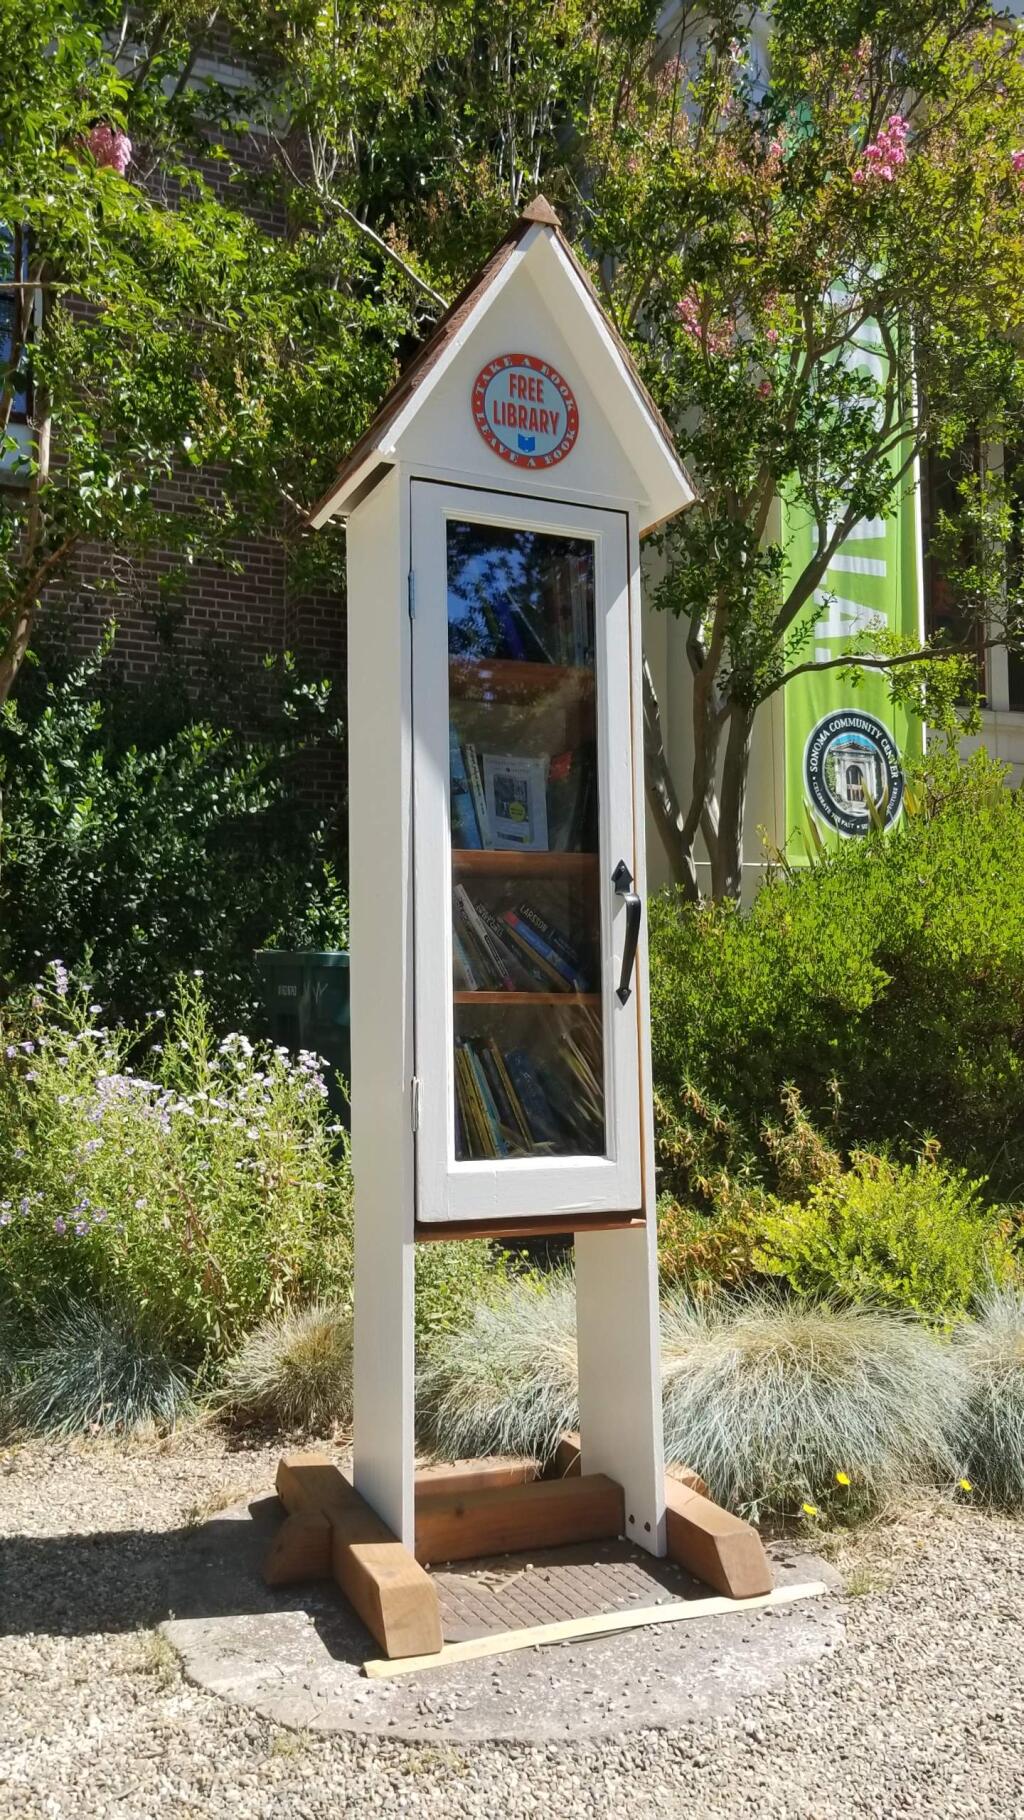 Fine literature, among other titles, can be found at the Little Free Library at the Sonoma Community Center.